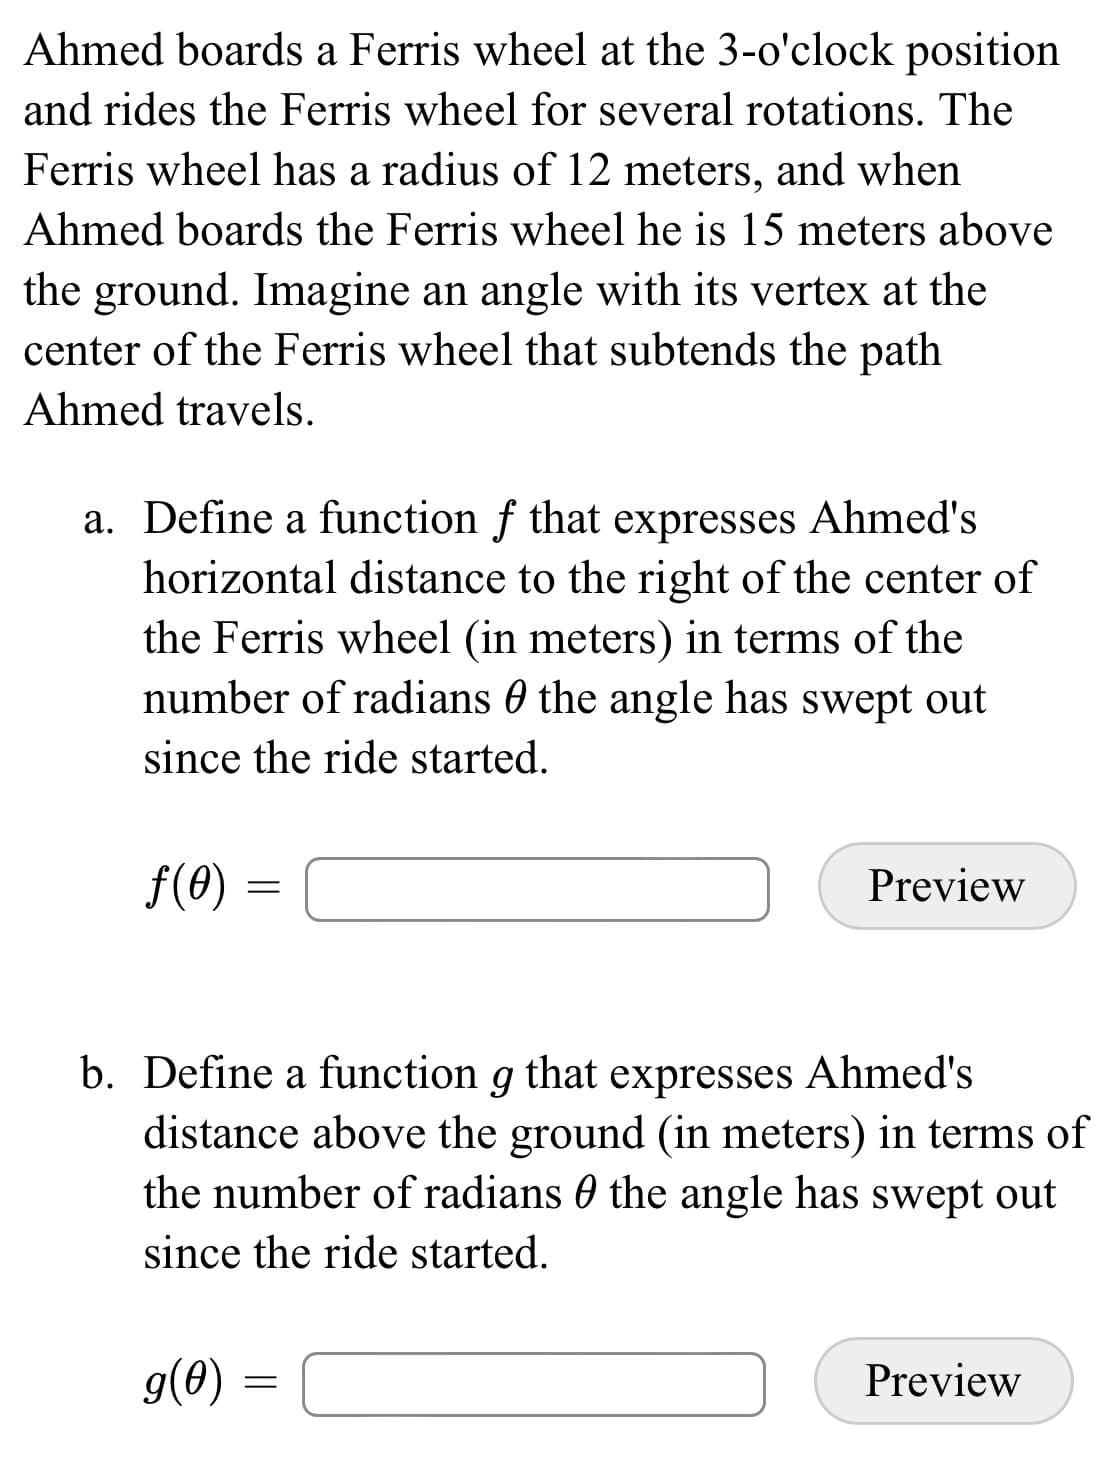 Ahmed boards a Ferris wheel at the 3-o'clock position
and rides the Ferris wheel for several rotations. The
Ferris wheel has a radius of 12 meters, and when
Ahmed boards the Ferris wheel he is 15 meters above
the ground. Imagine an angle with its vertex at the
center of the Ferris wheel that subtends the path
Ahmed travels.
a. Define a function f that expresses Ahmed's
horizontal distance to the right of the center of
the Ferris wheel (in meters) in terms of the
number of radians 0 the angle has swept out
since the ride started.
f(0) =
Preview
b. Define a function g that expresses Ahmed's
distance above the ground (in meters) in terms of
the number of radians 0 the angle has swept out
since the ride started.
g(0) :
Preview
